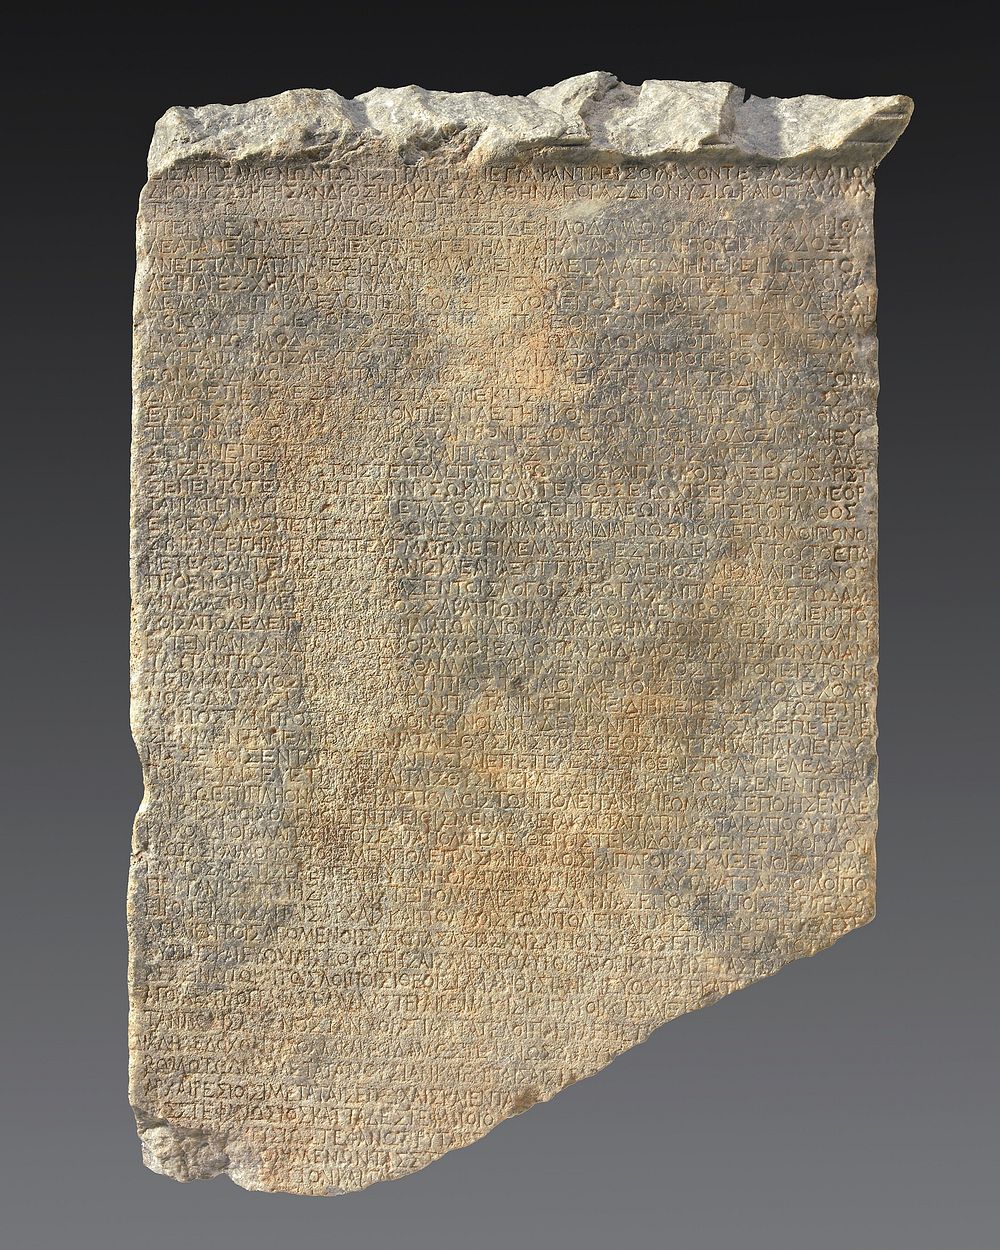 Stele with Inscription